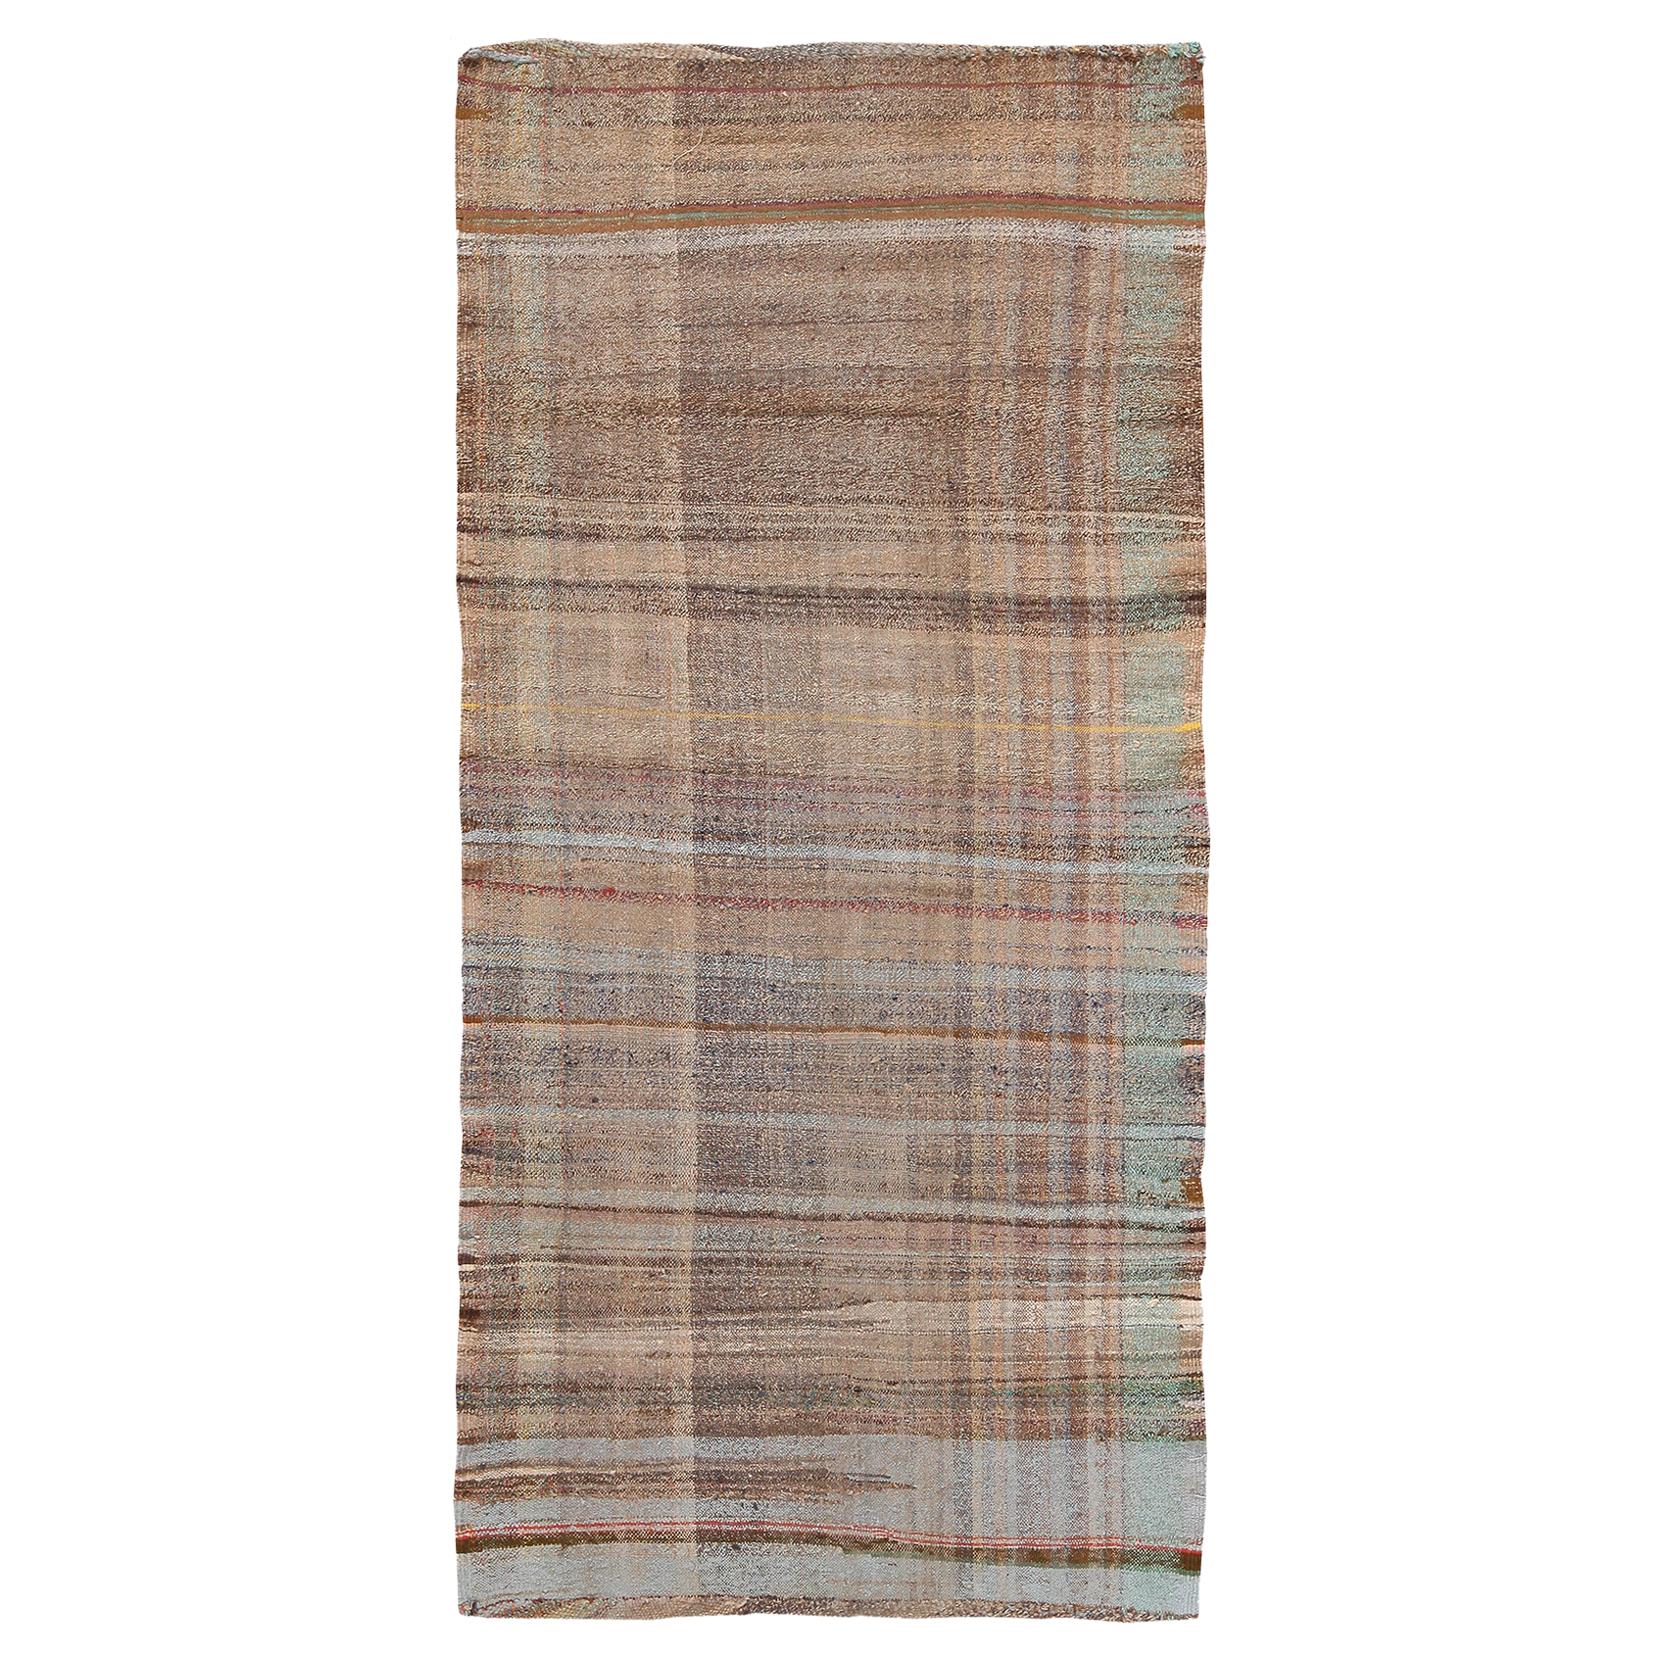 Earth Tone Vintage Persian Kilim Runner Rug. Size: 3 ft 3 in x 7 ft 2 in